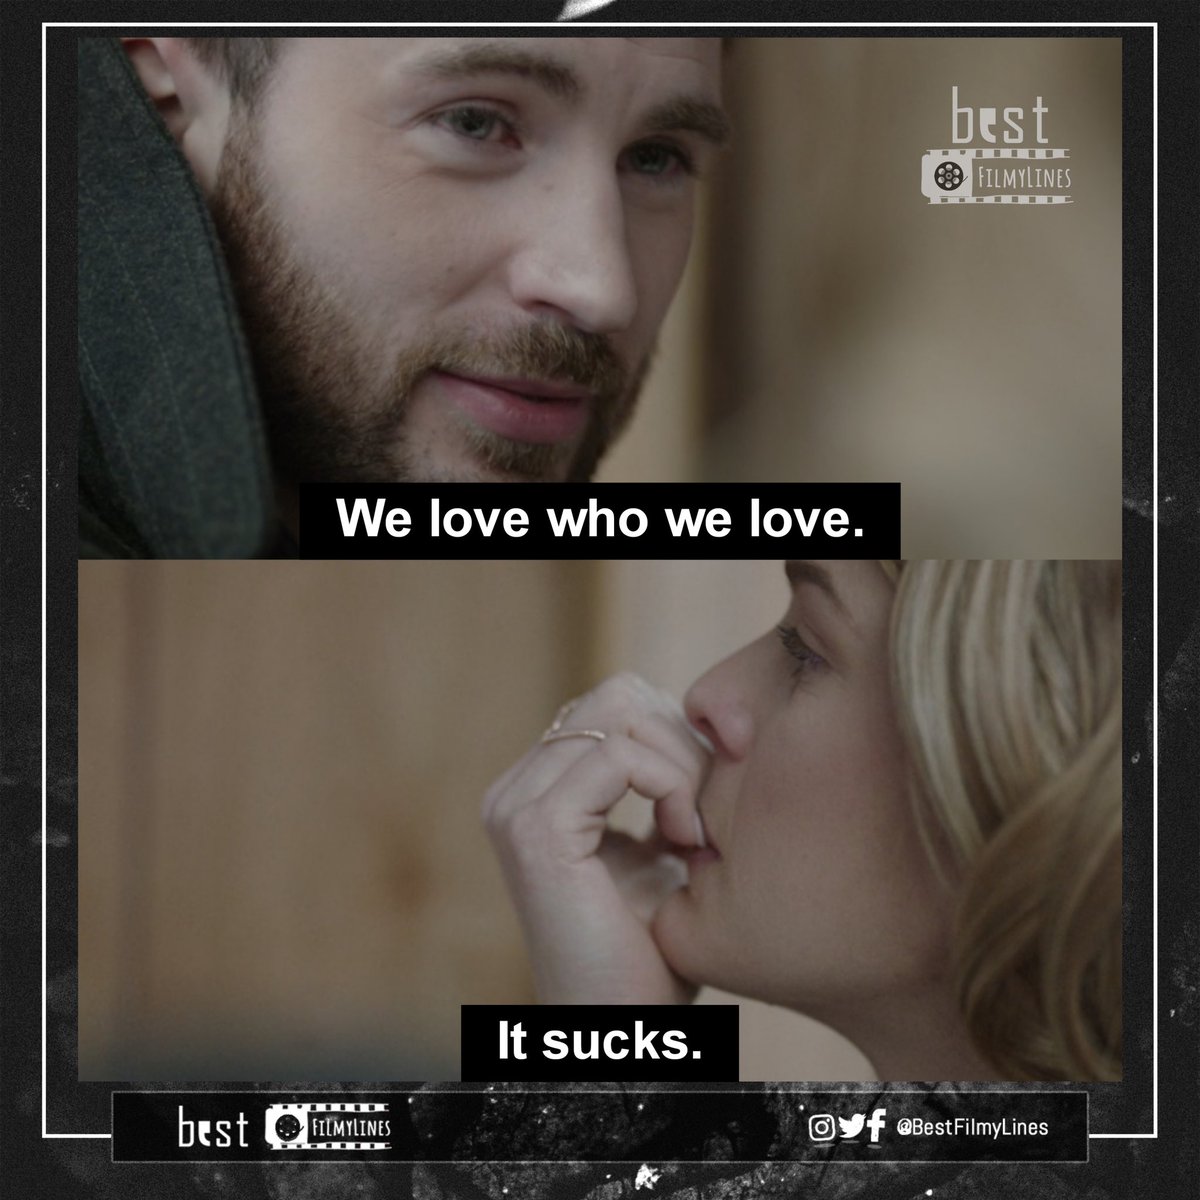 - Before We Go (2014), dir. Chris Evans
.
.
#beforewego #chrisevans #aliceeve #hollywood #hollywoodmovie #hollywoodmovies #english #cinema #movie #film #dialogue #dialogues #quote #quotes #webseries #moviequotes #tvseries #series #rvcjinsta #bestfilmylines